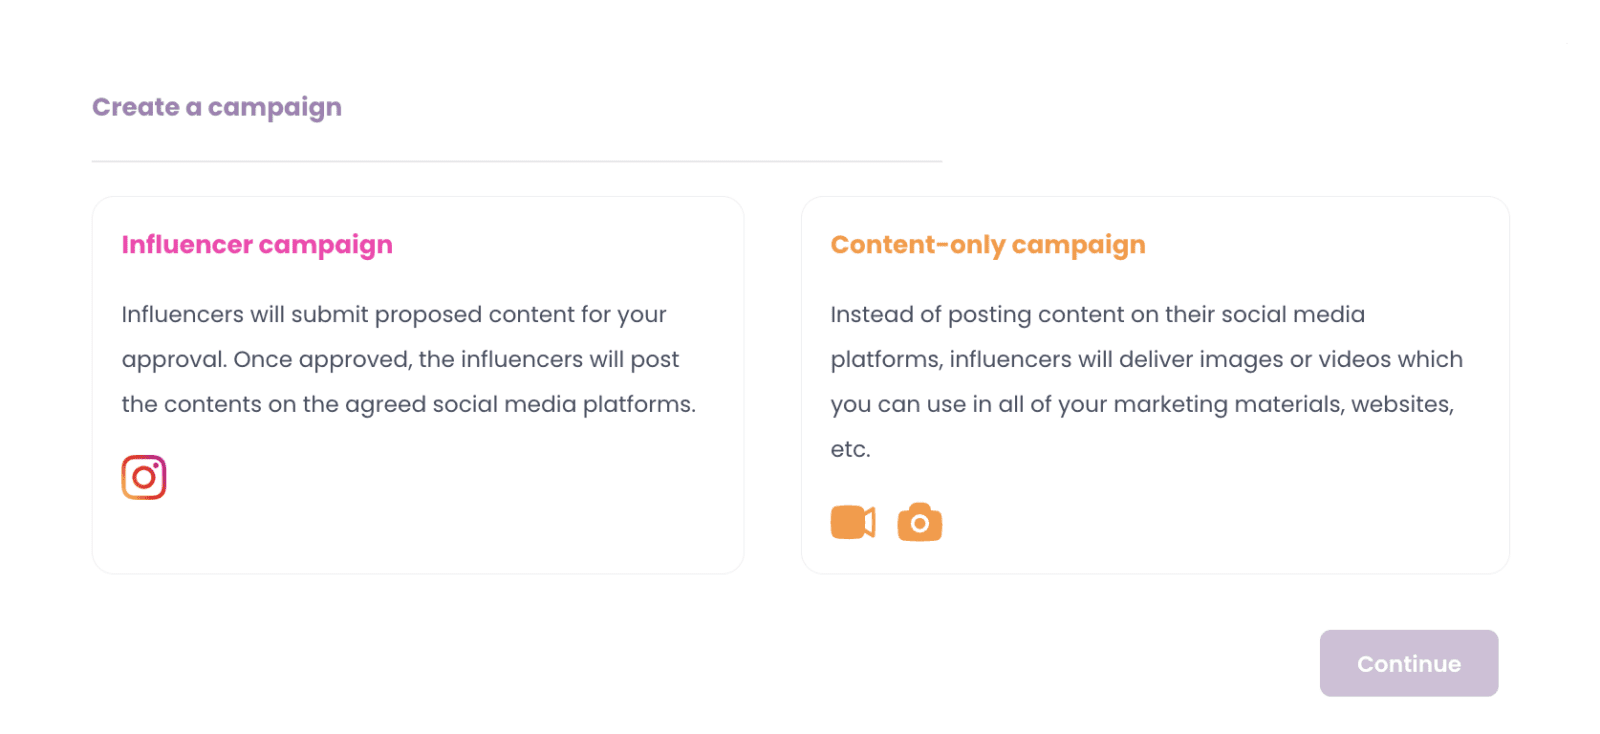 Promoty campaign types: influencer campaign and content-only